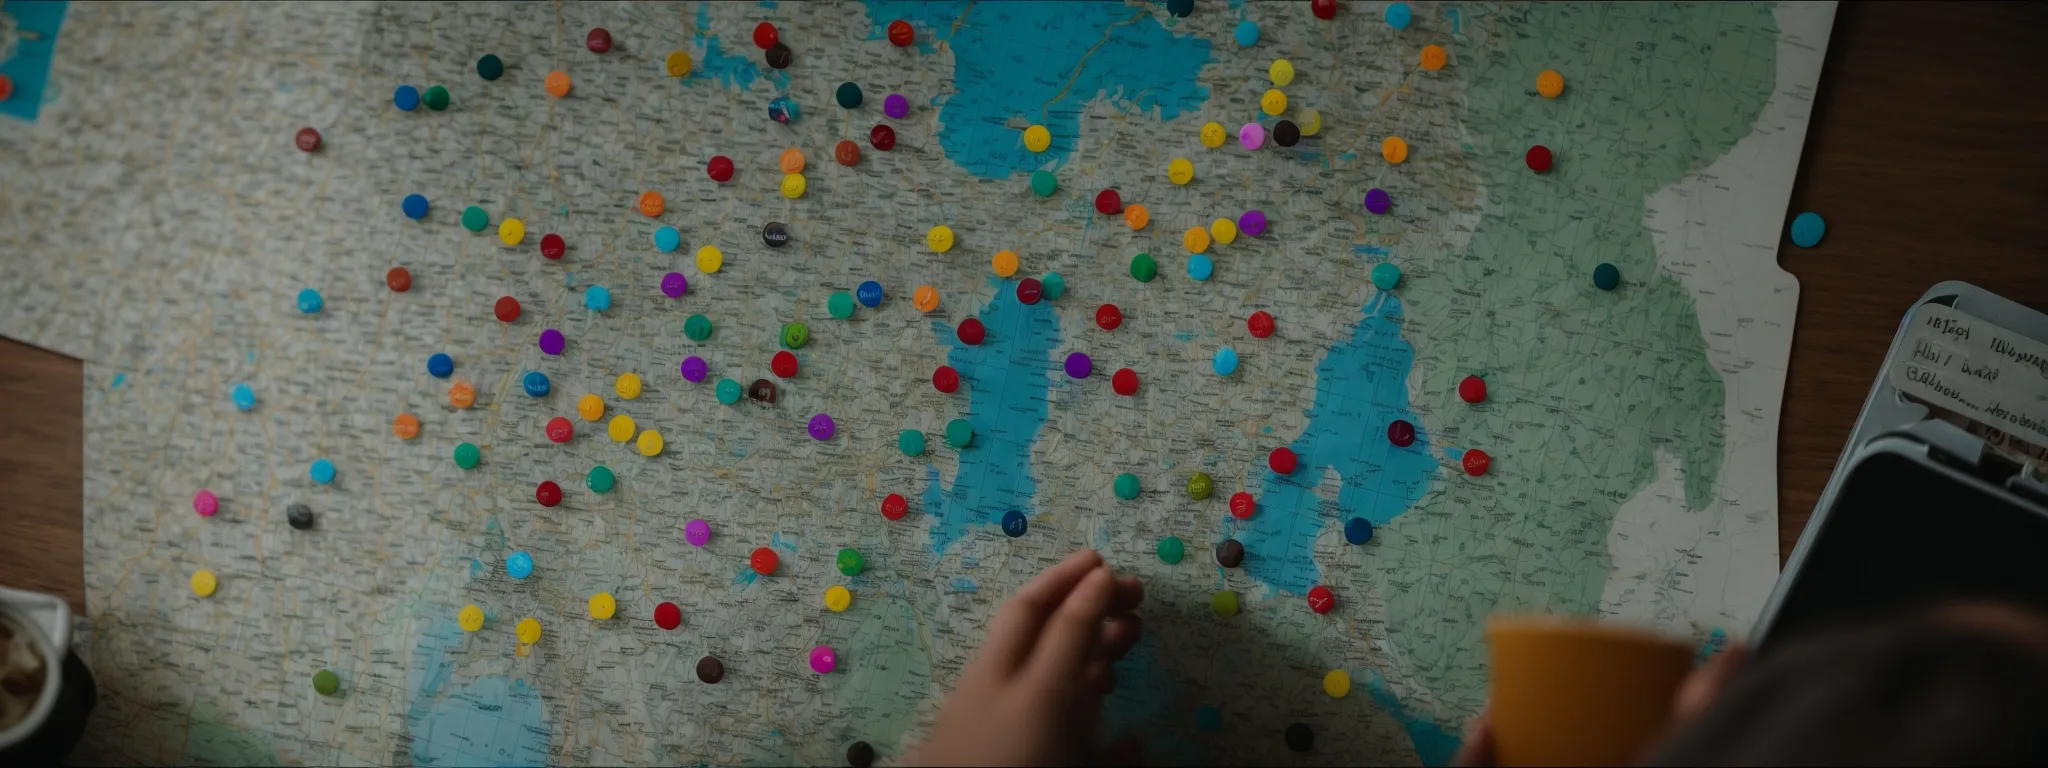 a person sits contemplating a map sprawled out on a table, with various colorful pins indicating different locations.